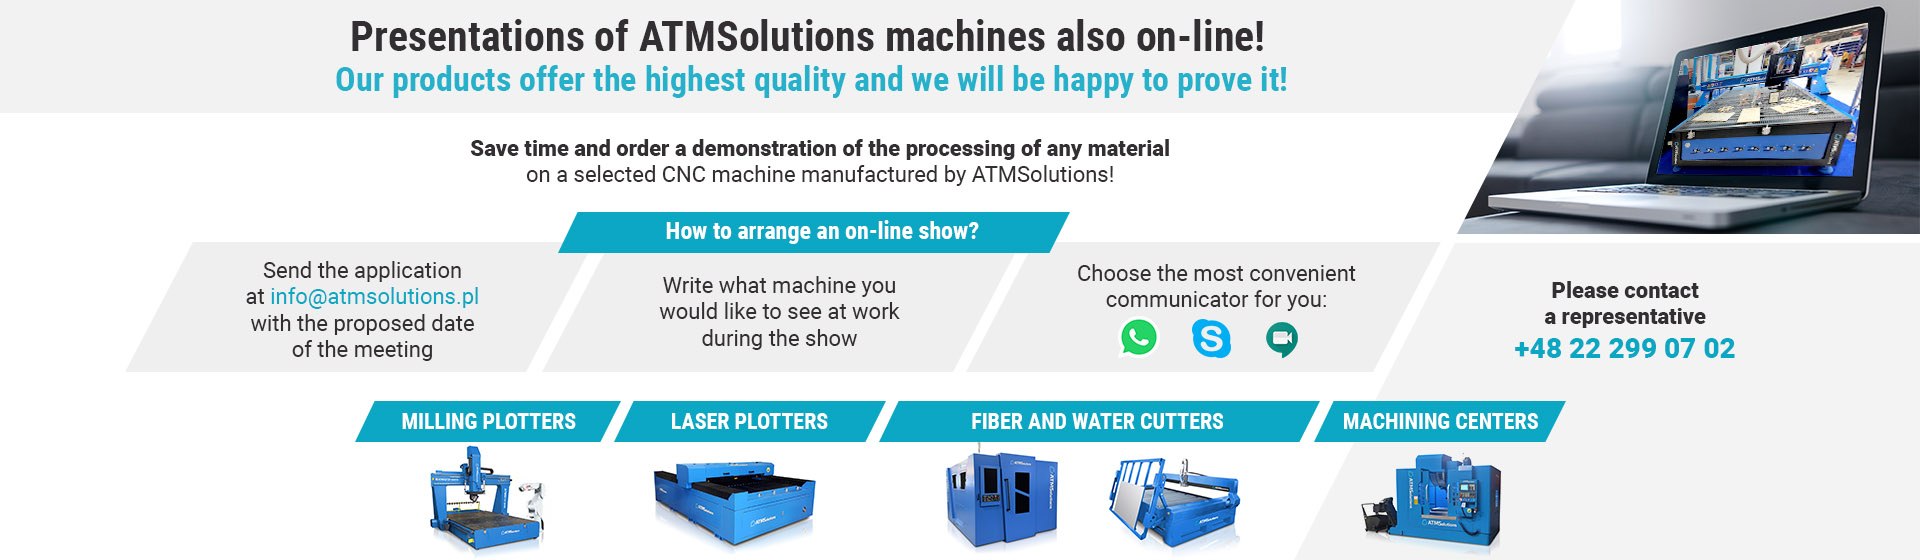 Presentations of ATMSolutions machines also on-line!